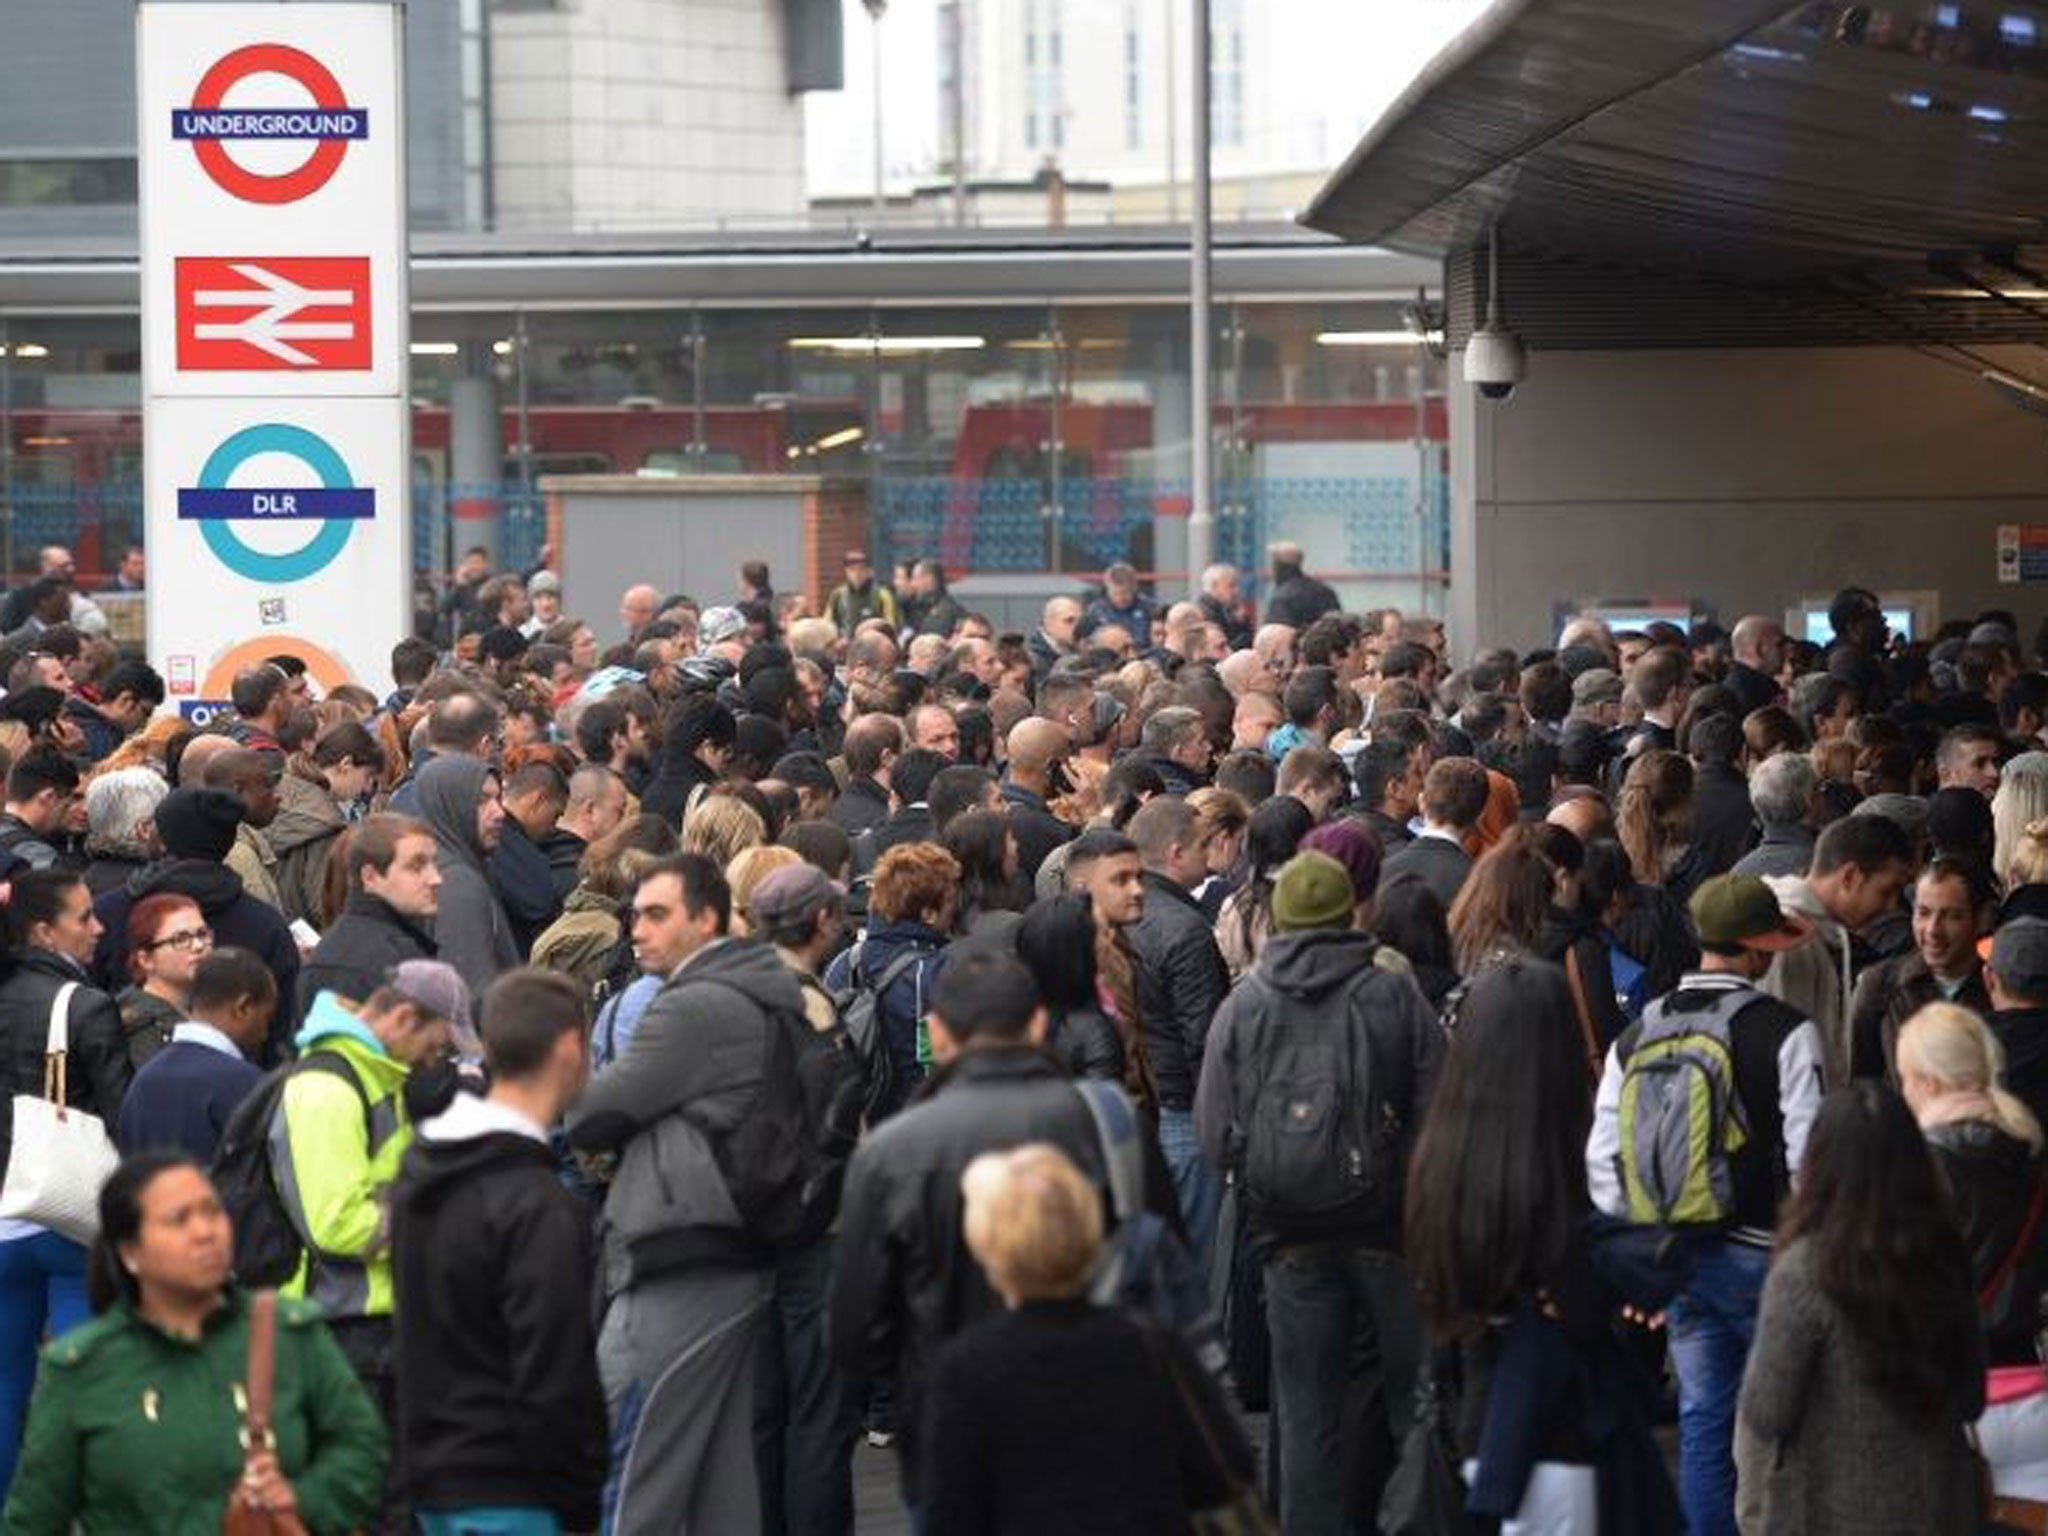 Commuters at Stratford Underground, Overground and DLR Station in east London, on the first day of a 48 hour strike by tube workers on the London Underground over ticket office closures.